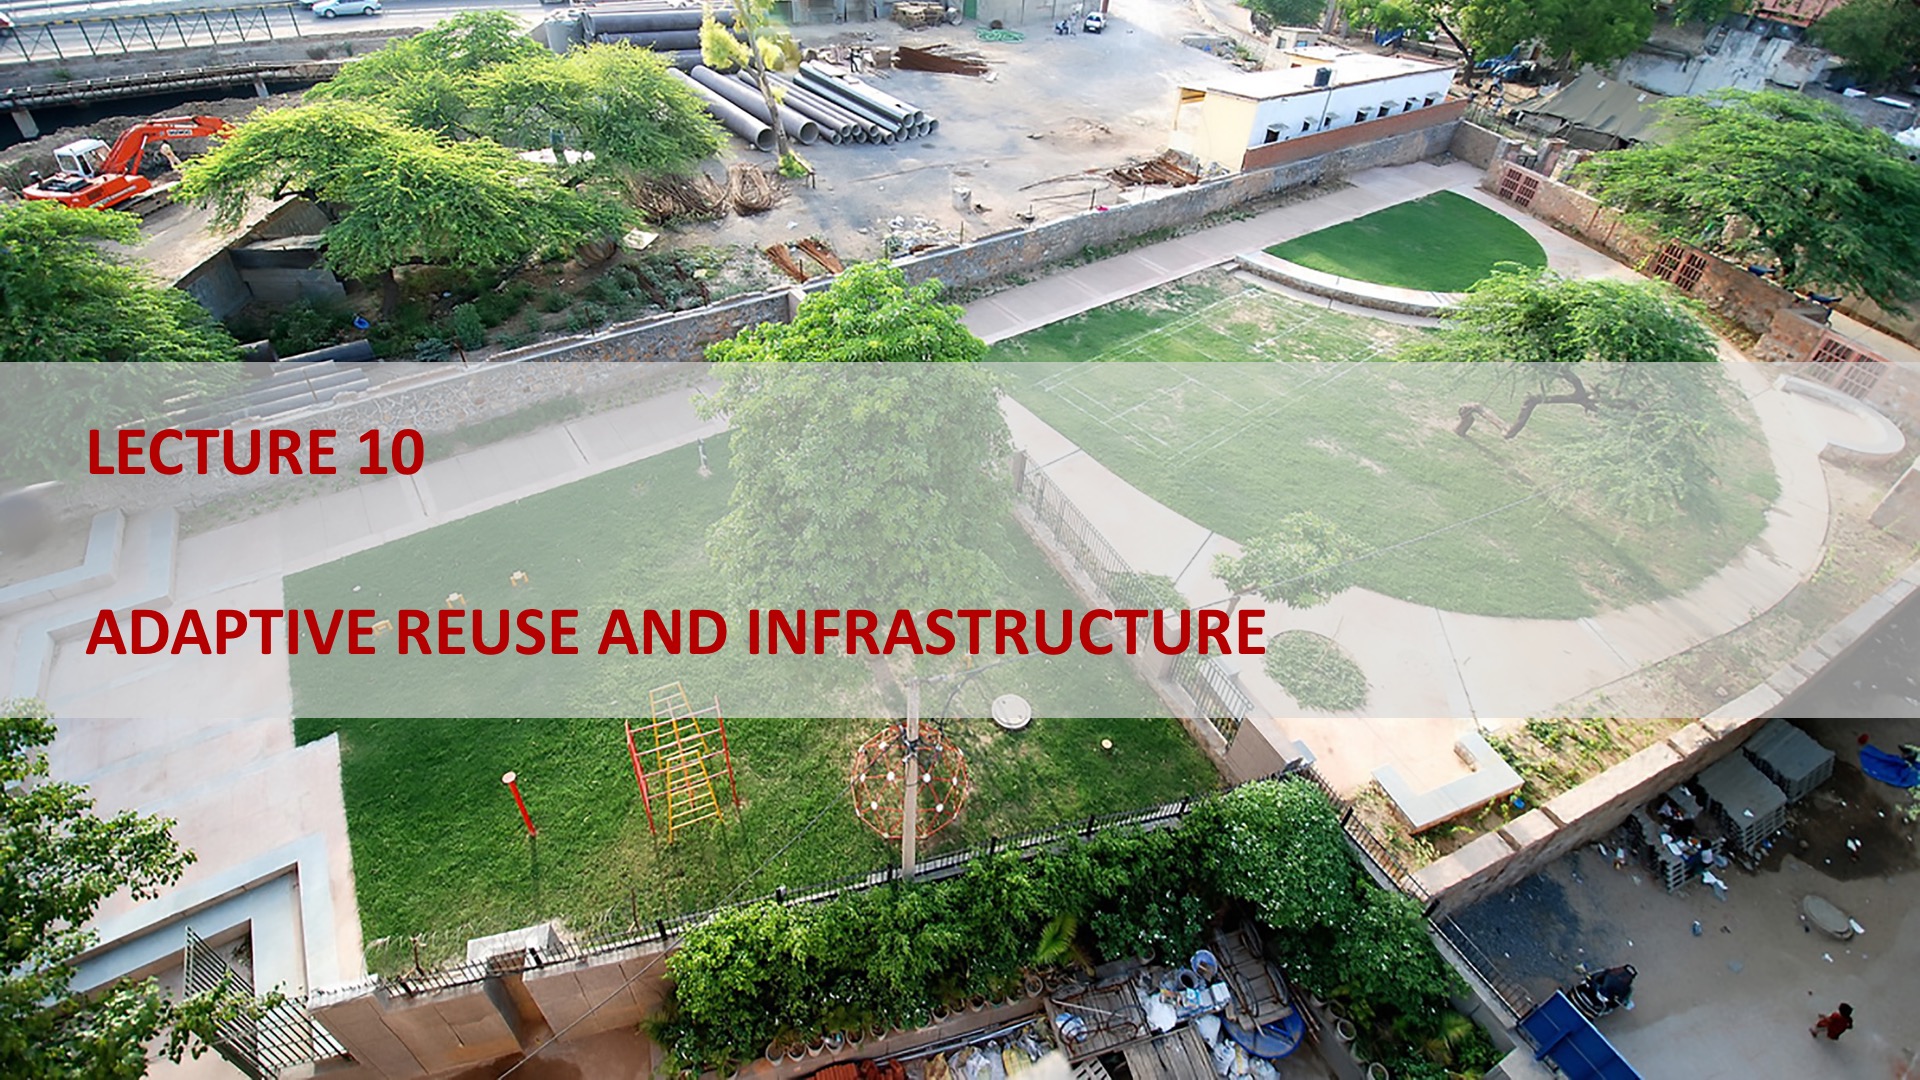 Lecture 10: Adaptive Reuse and Infrastructure